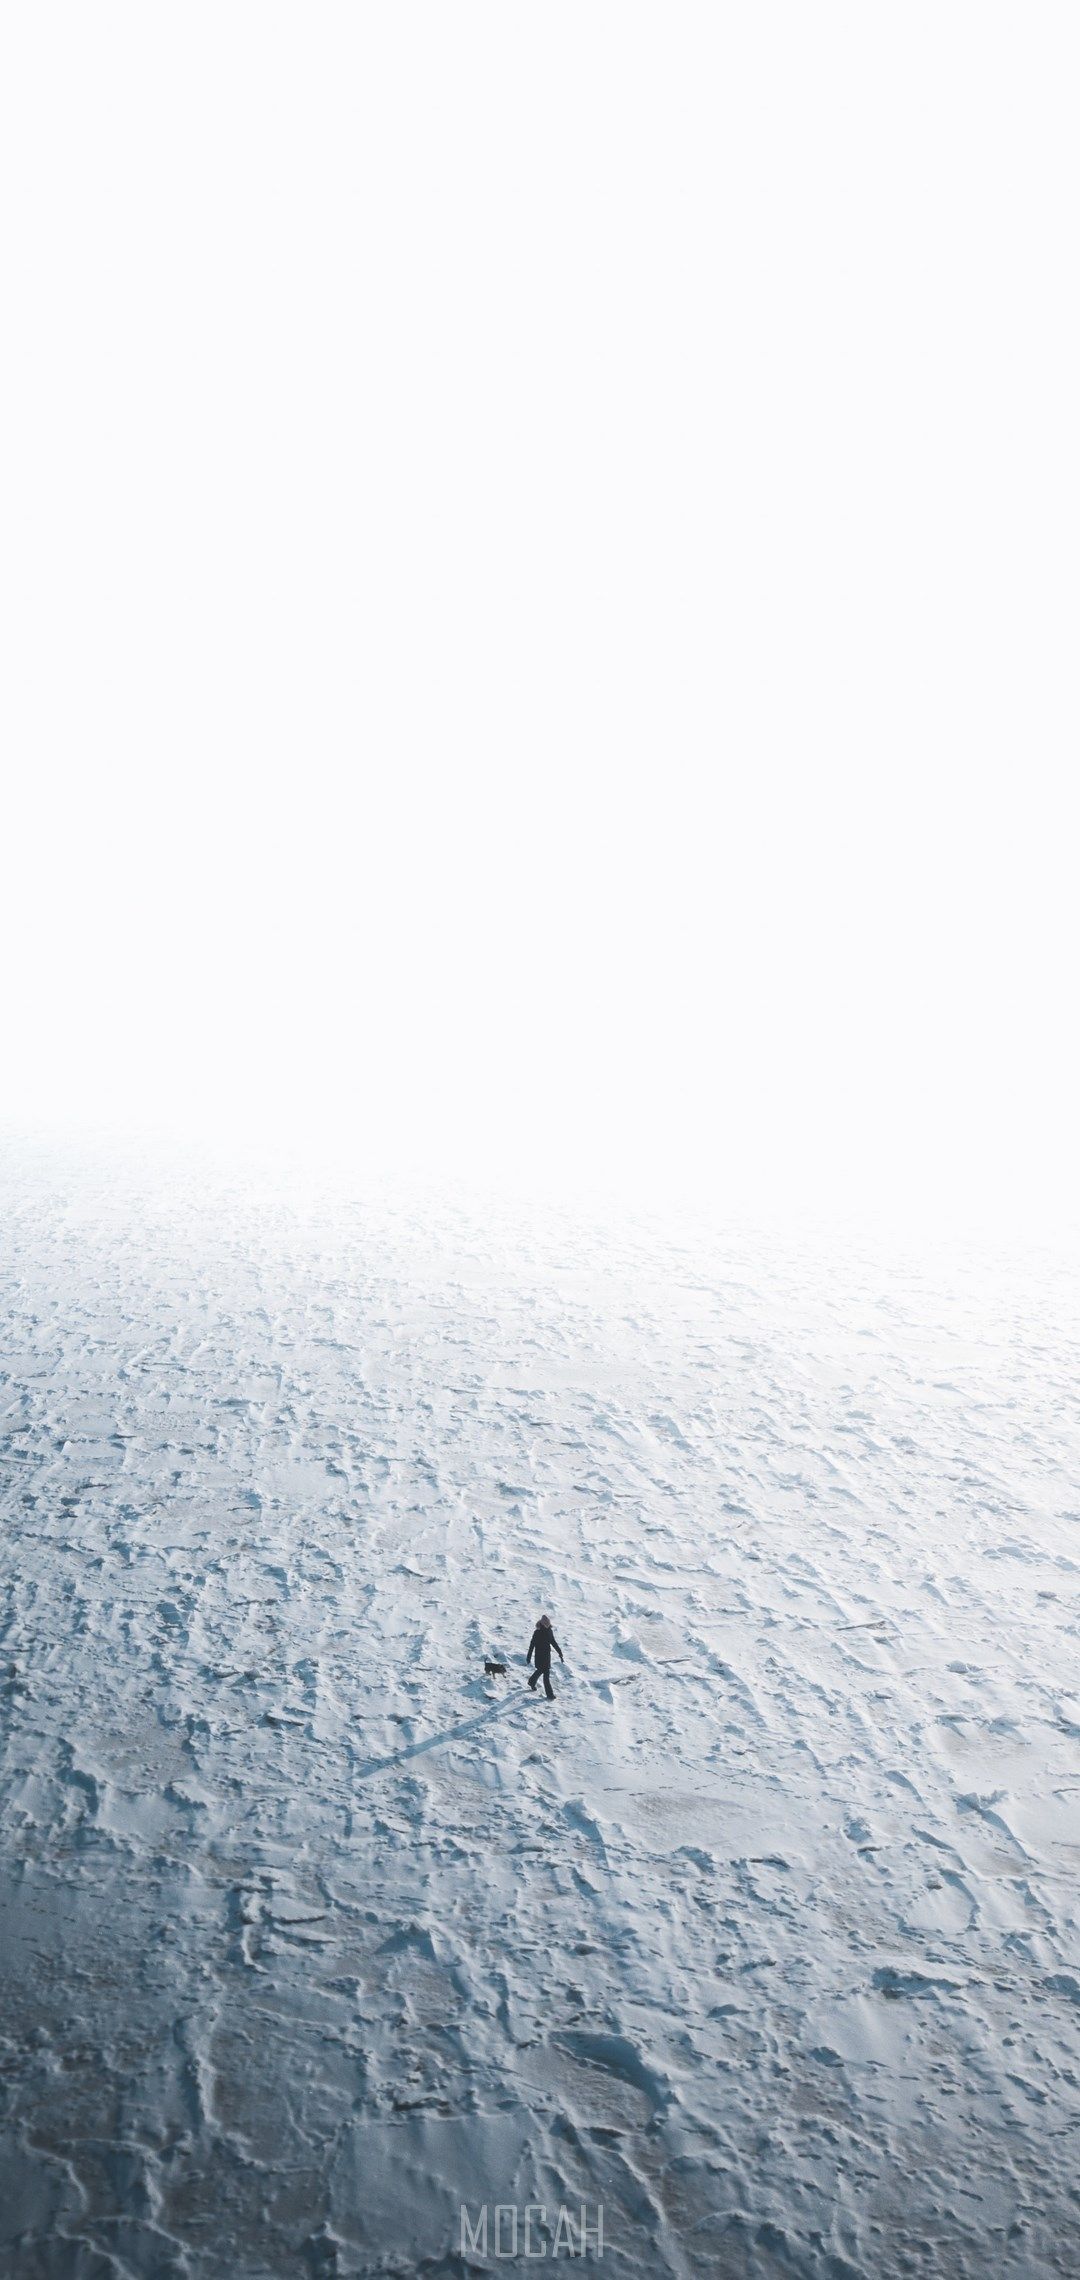 A person on a surfboard in the ocean - Ocean